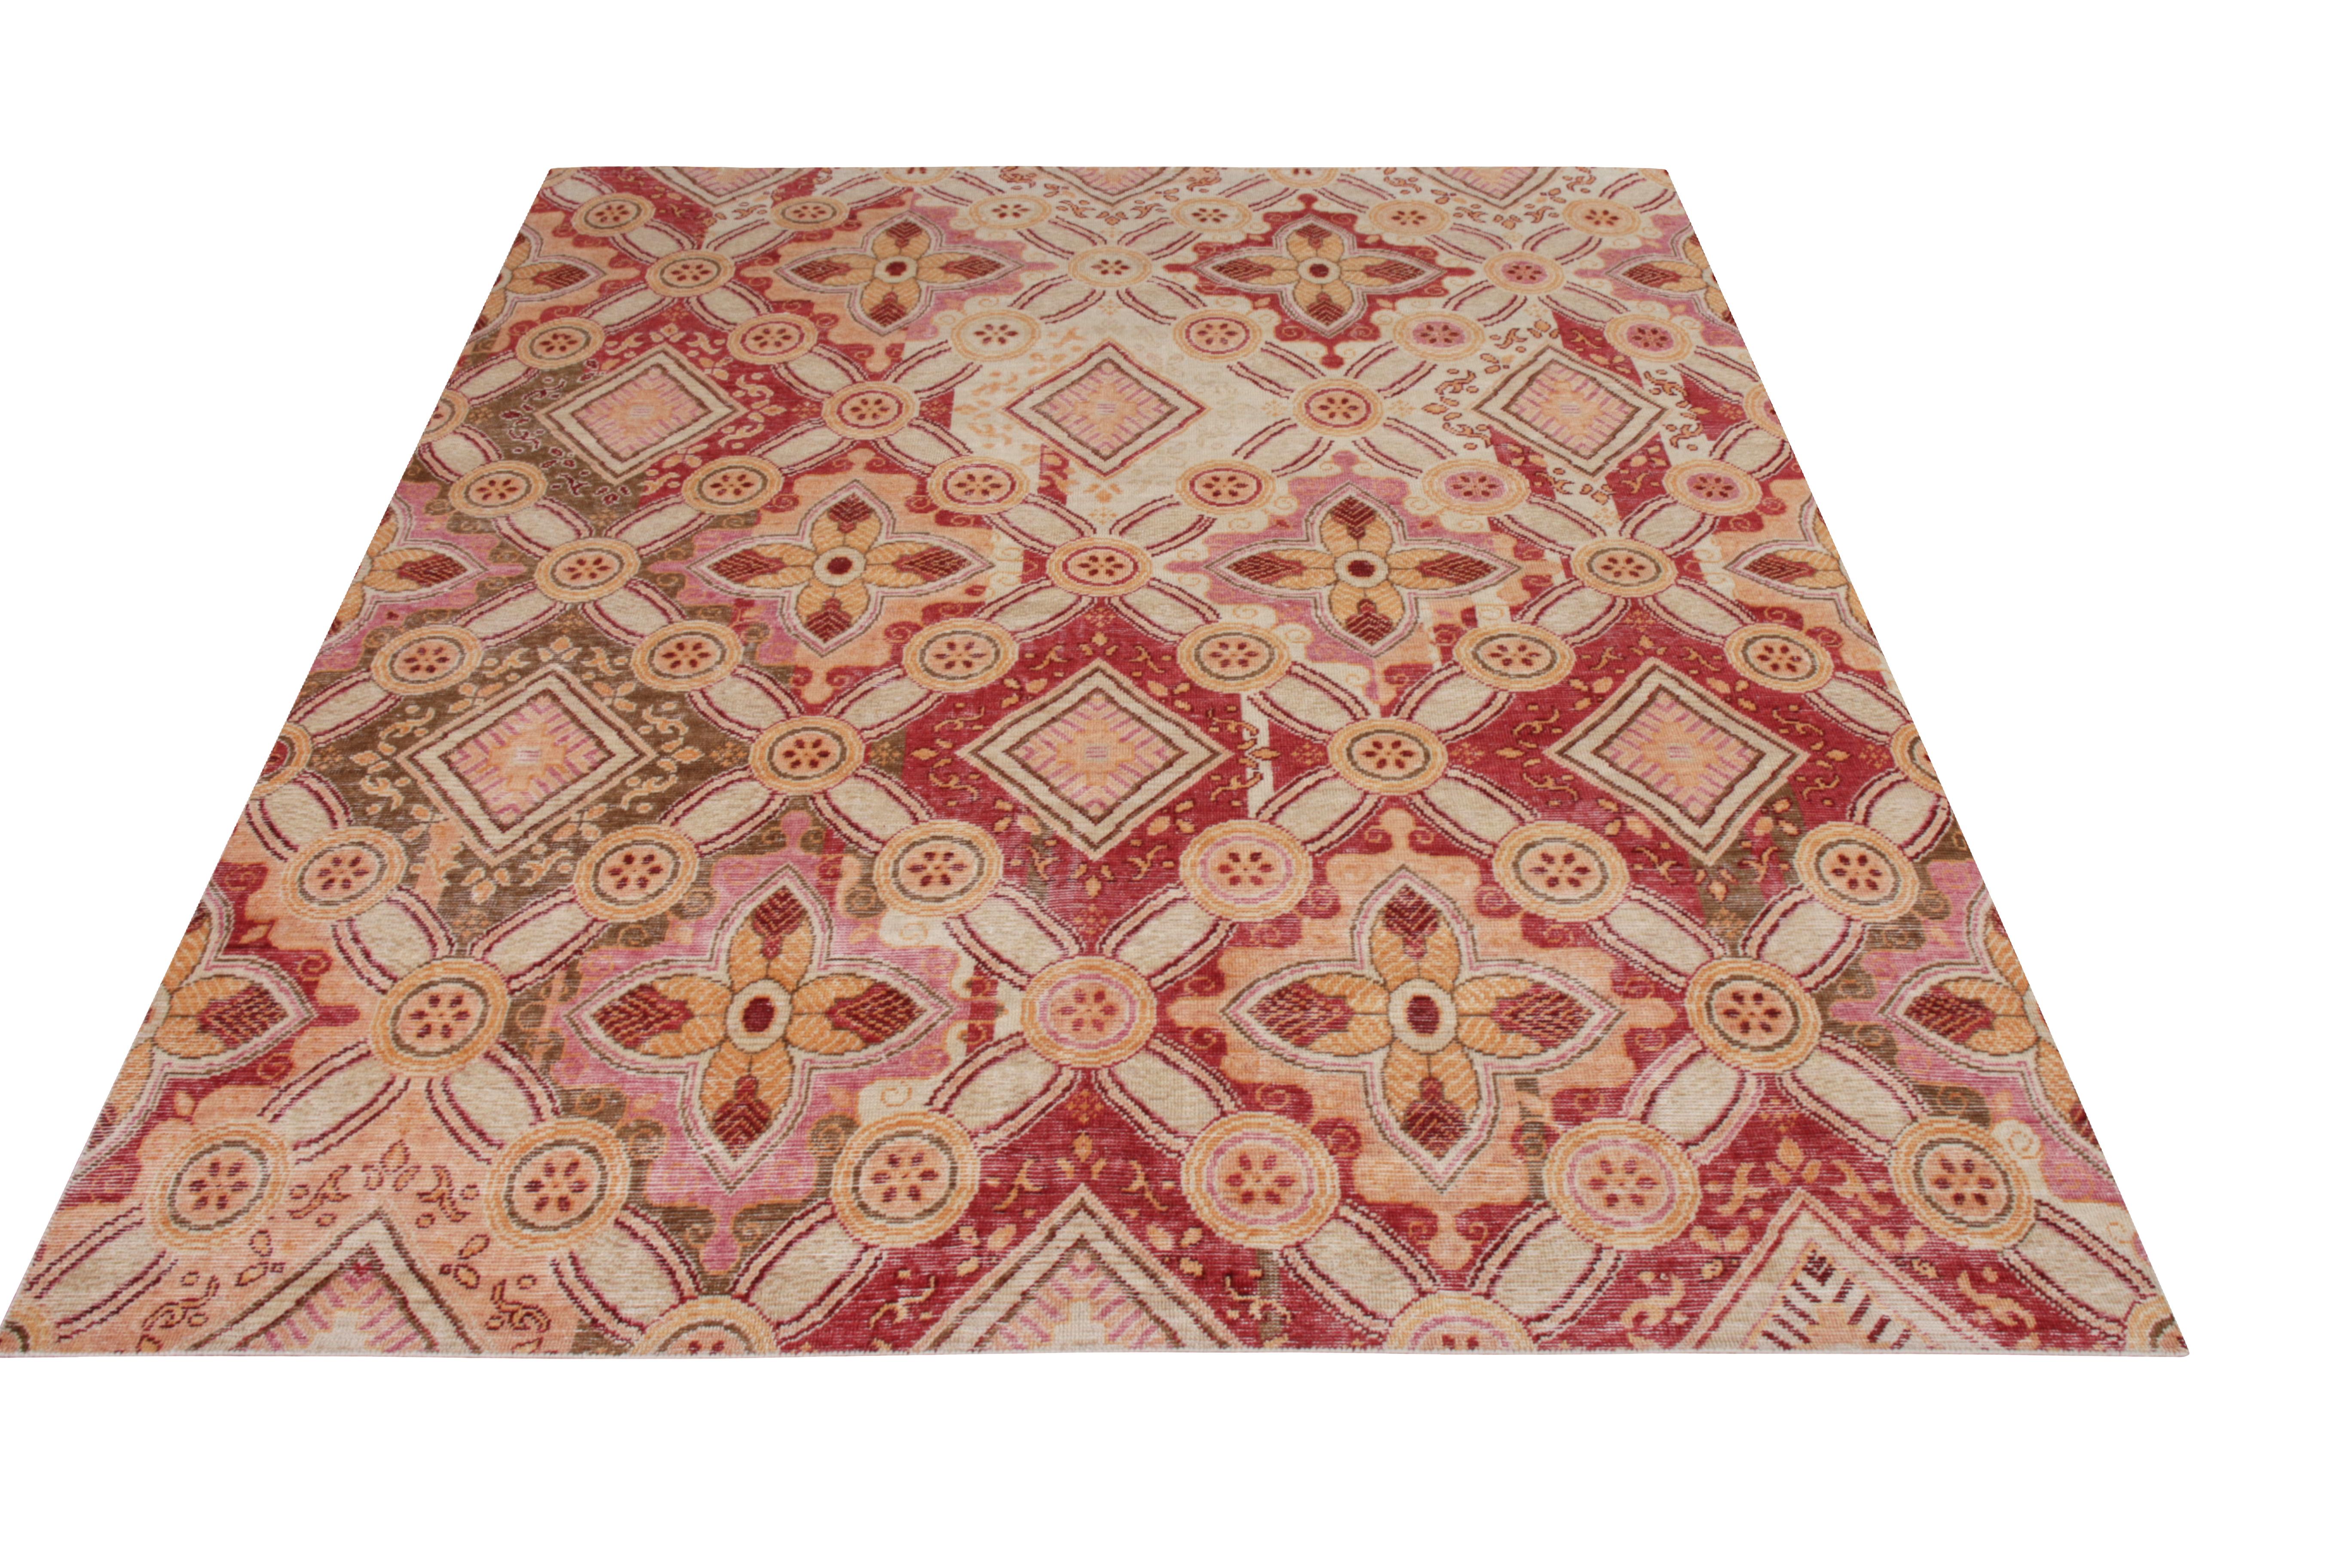 An 8 x 10 pink and red floral rug, joining the Homage Collection by Rug & Kilim. Hand knotted in wool, drawing inspiration from European floral motifs akin to English and French design sensibilities.

Further on the Design: Varied color and subtle